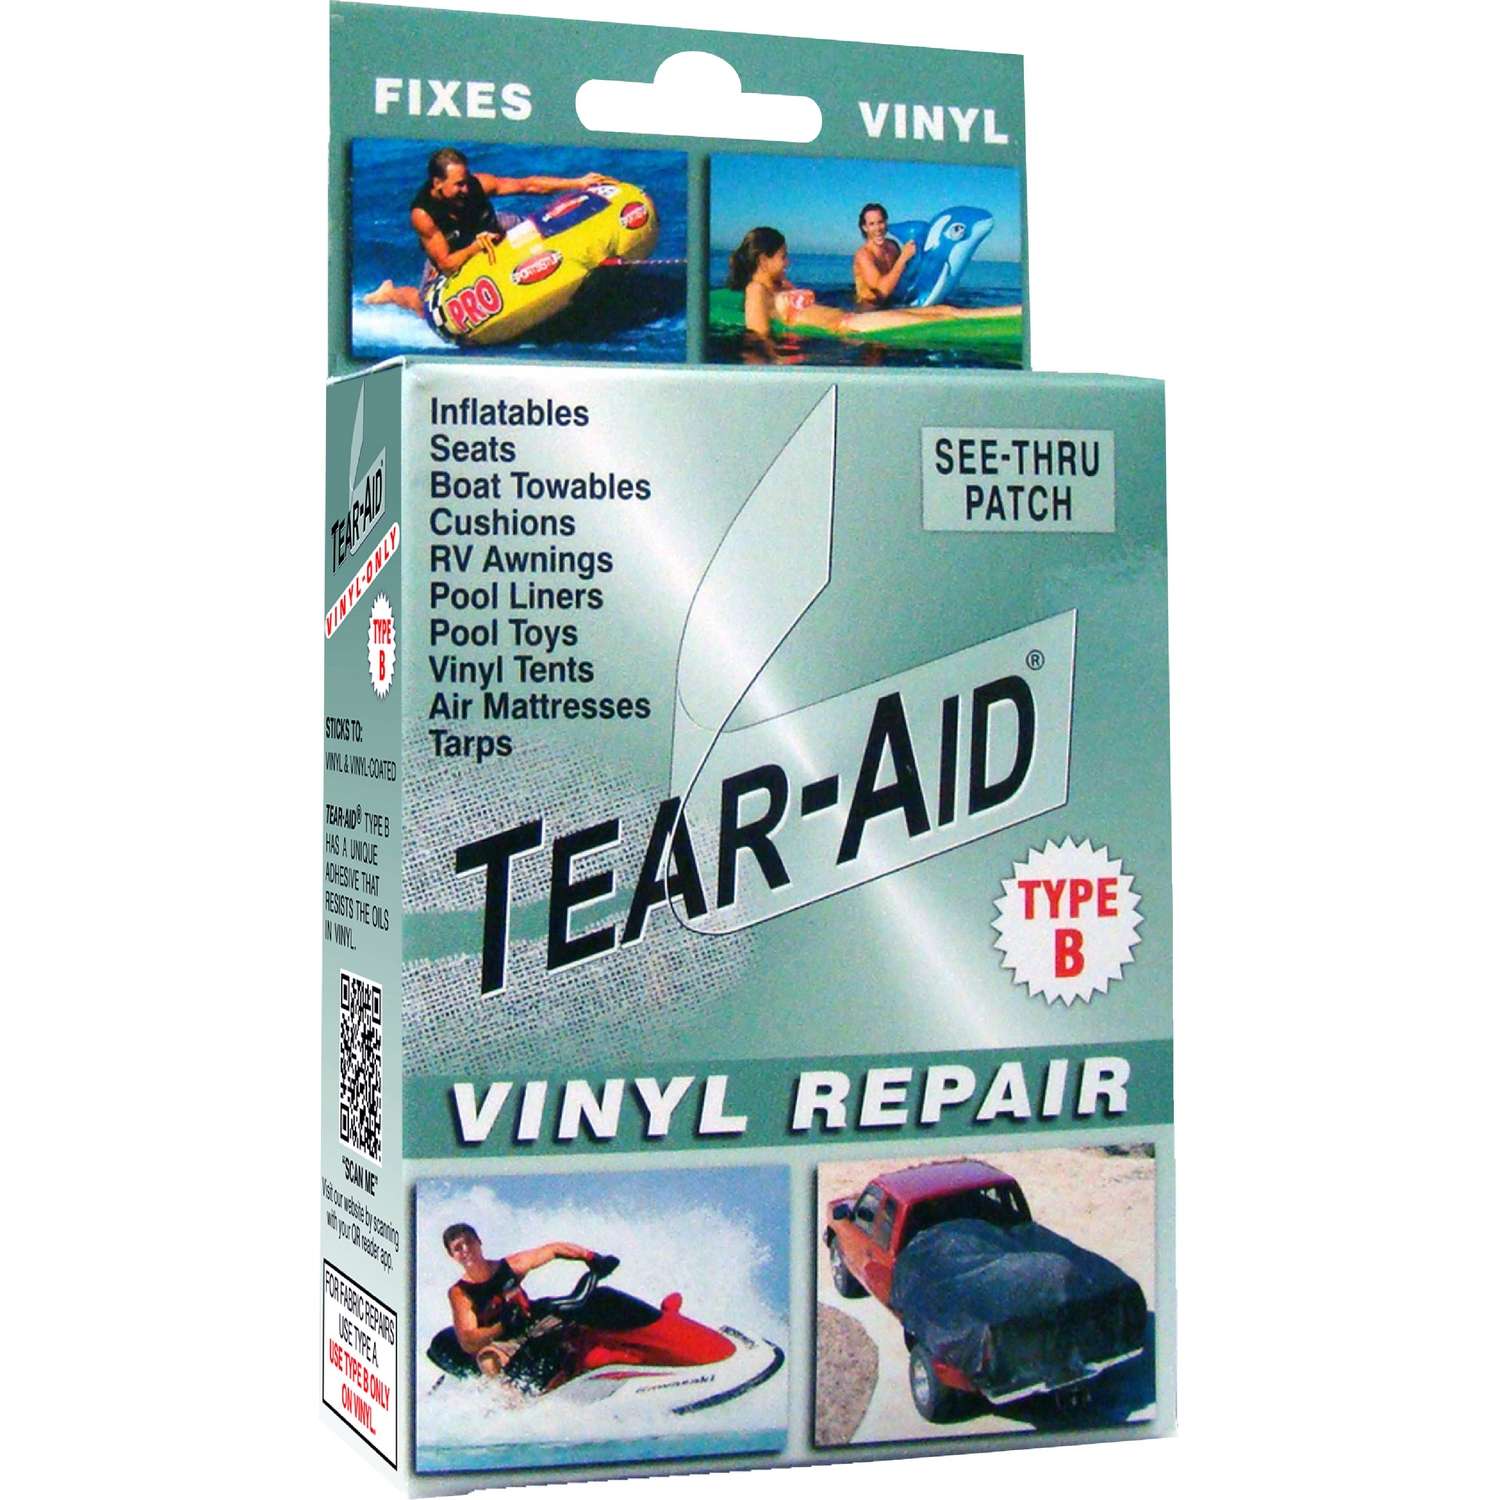 TEAR AID inflatable repair patch for vinyl 3" wide "B" per FOOT price 12” 